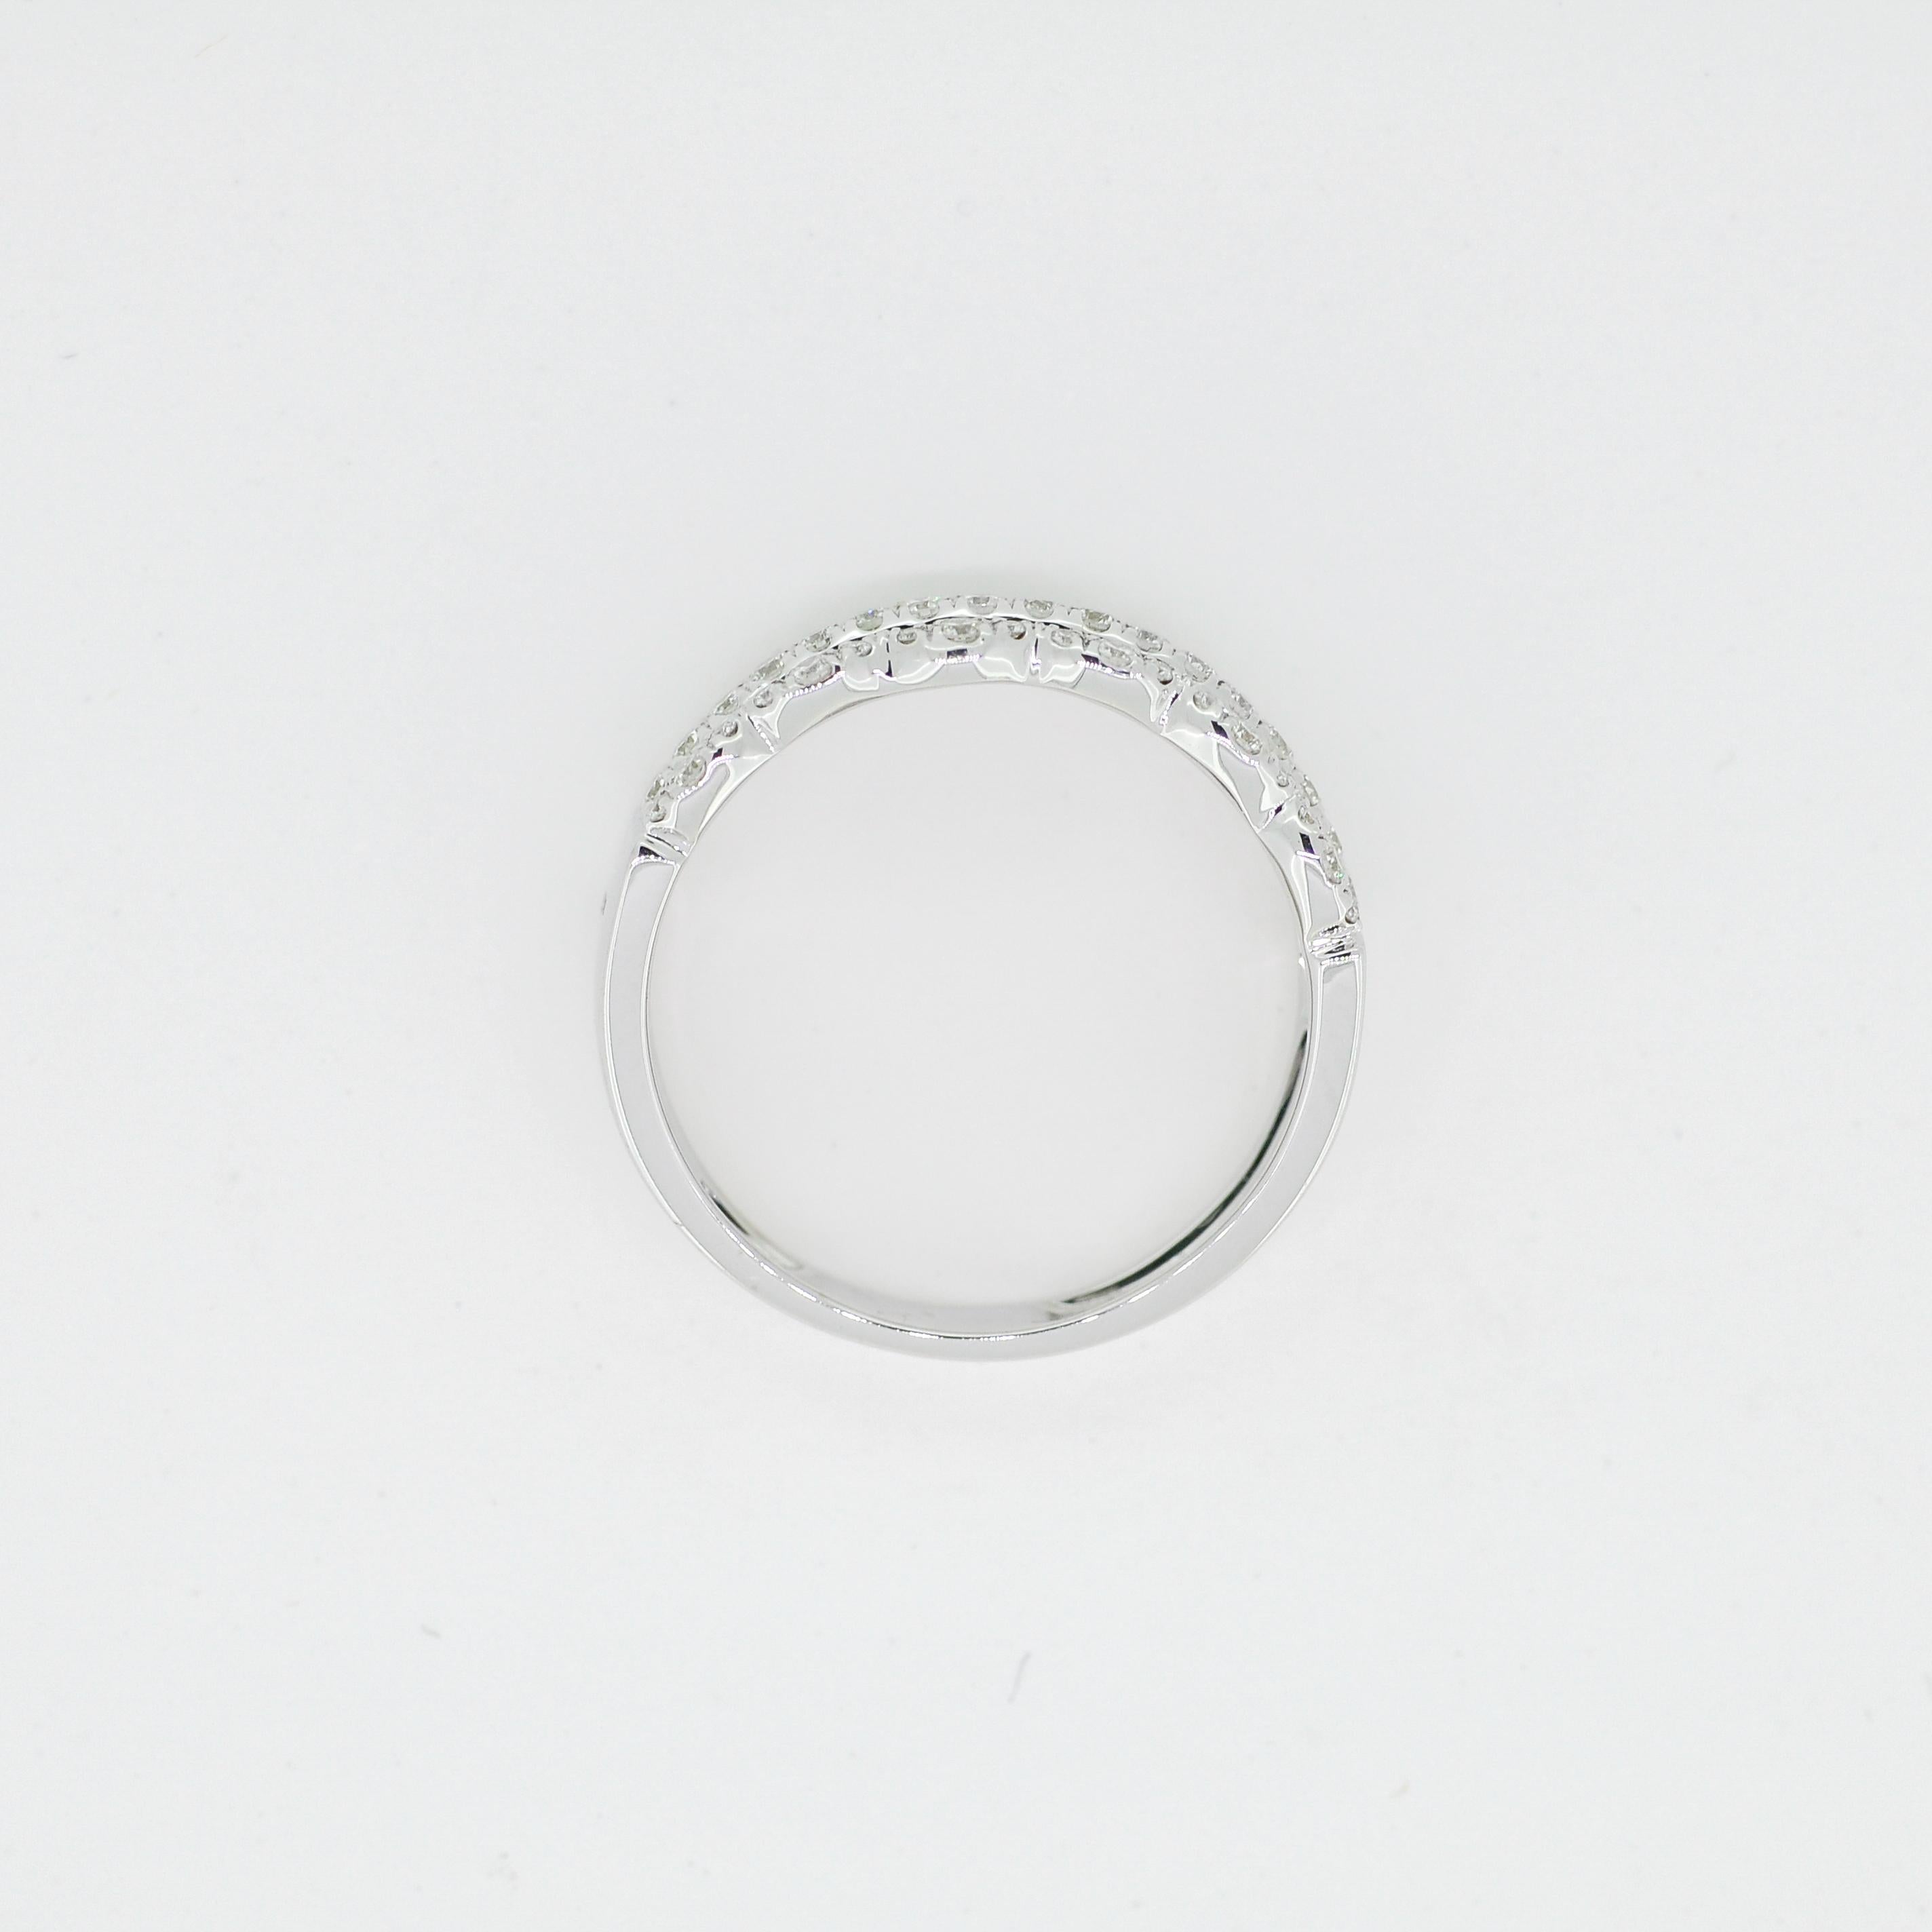 Modern Natural Diamond Ring 0.76 carat 18KT White Gold Cocktail Half Eternity Ring Band For Sale